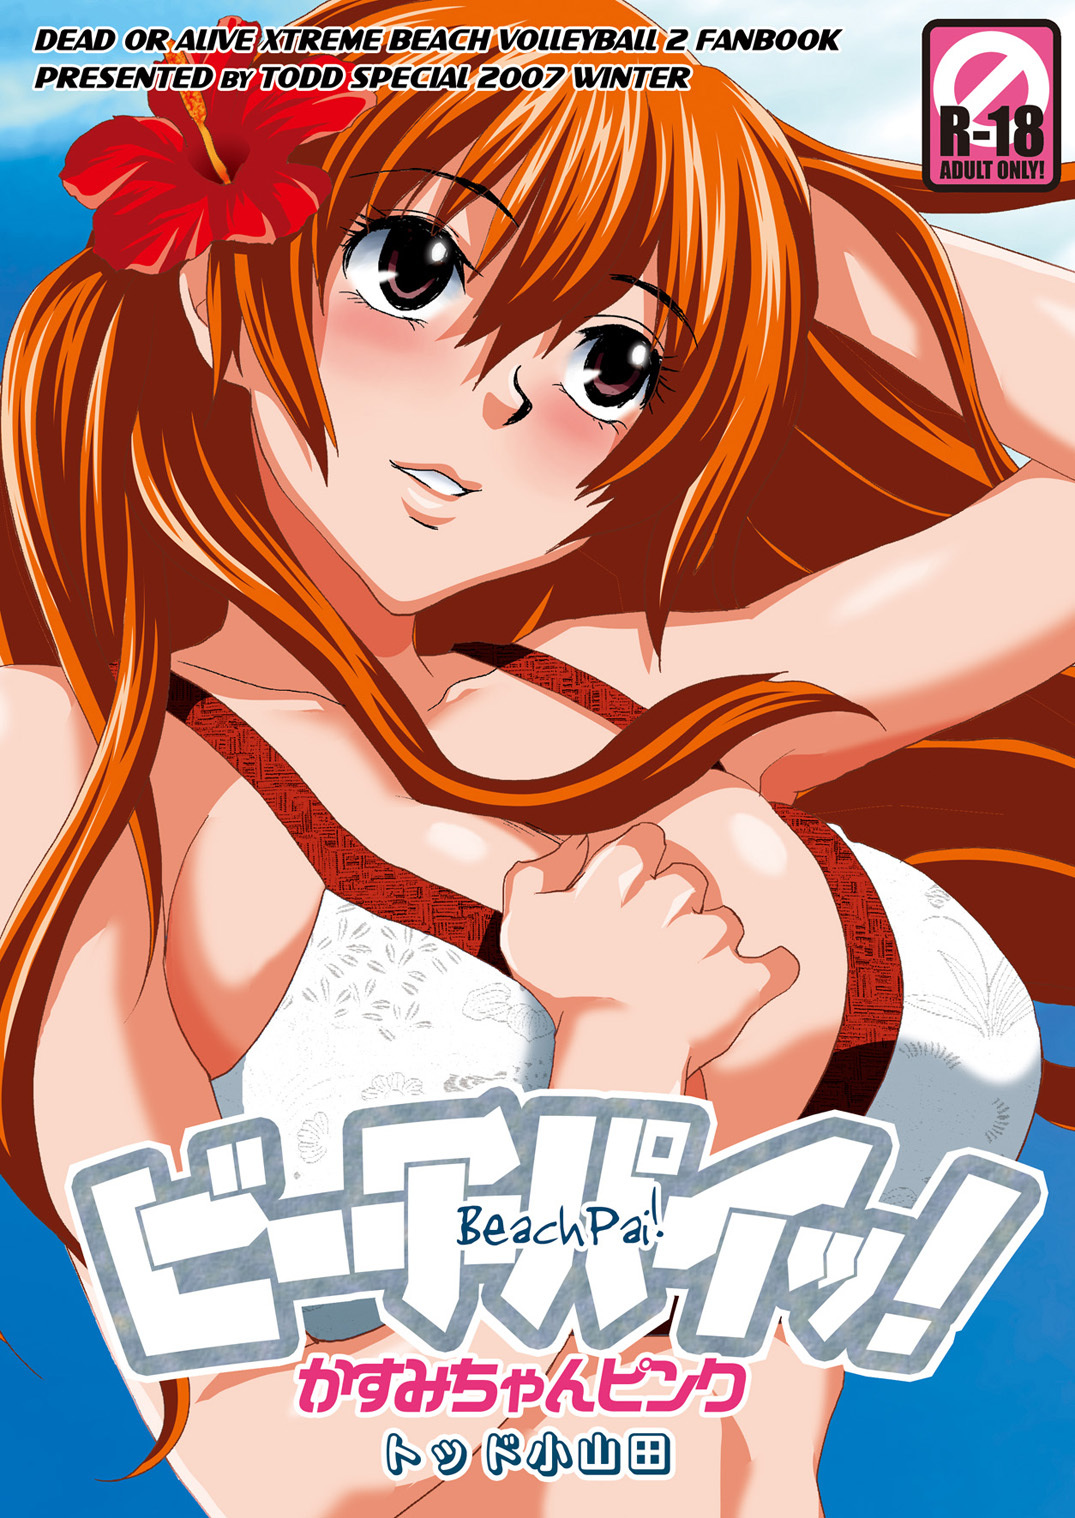 [Todd Special (Todd Oyamada)] Beach Pai! Kasumi-chan Pink (Dead or Alive Xtreme Beach Volleyball) [Digital] page 1 full